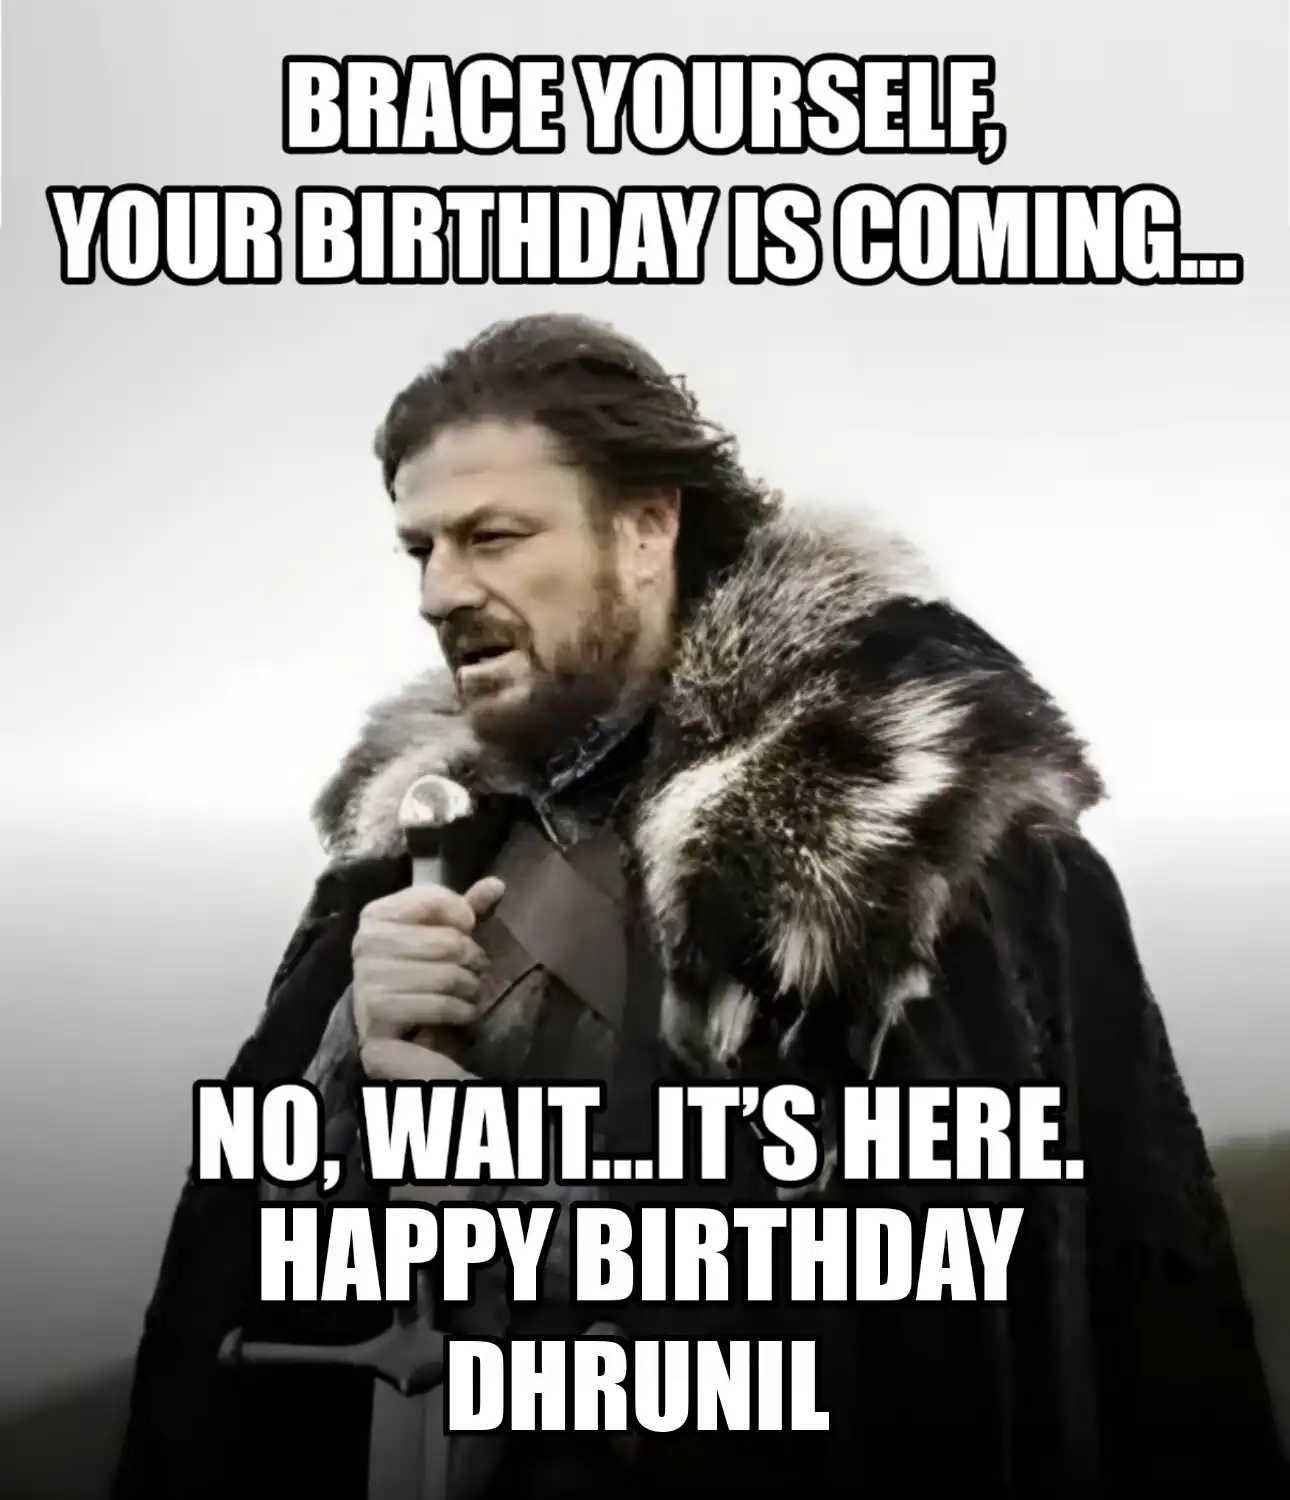 Happy Birthday Dhrunil Brace Yourself Your Birthday Is Coming Meme